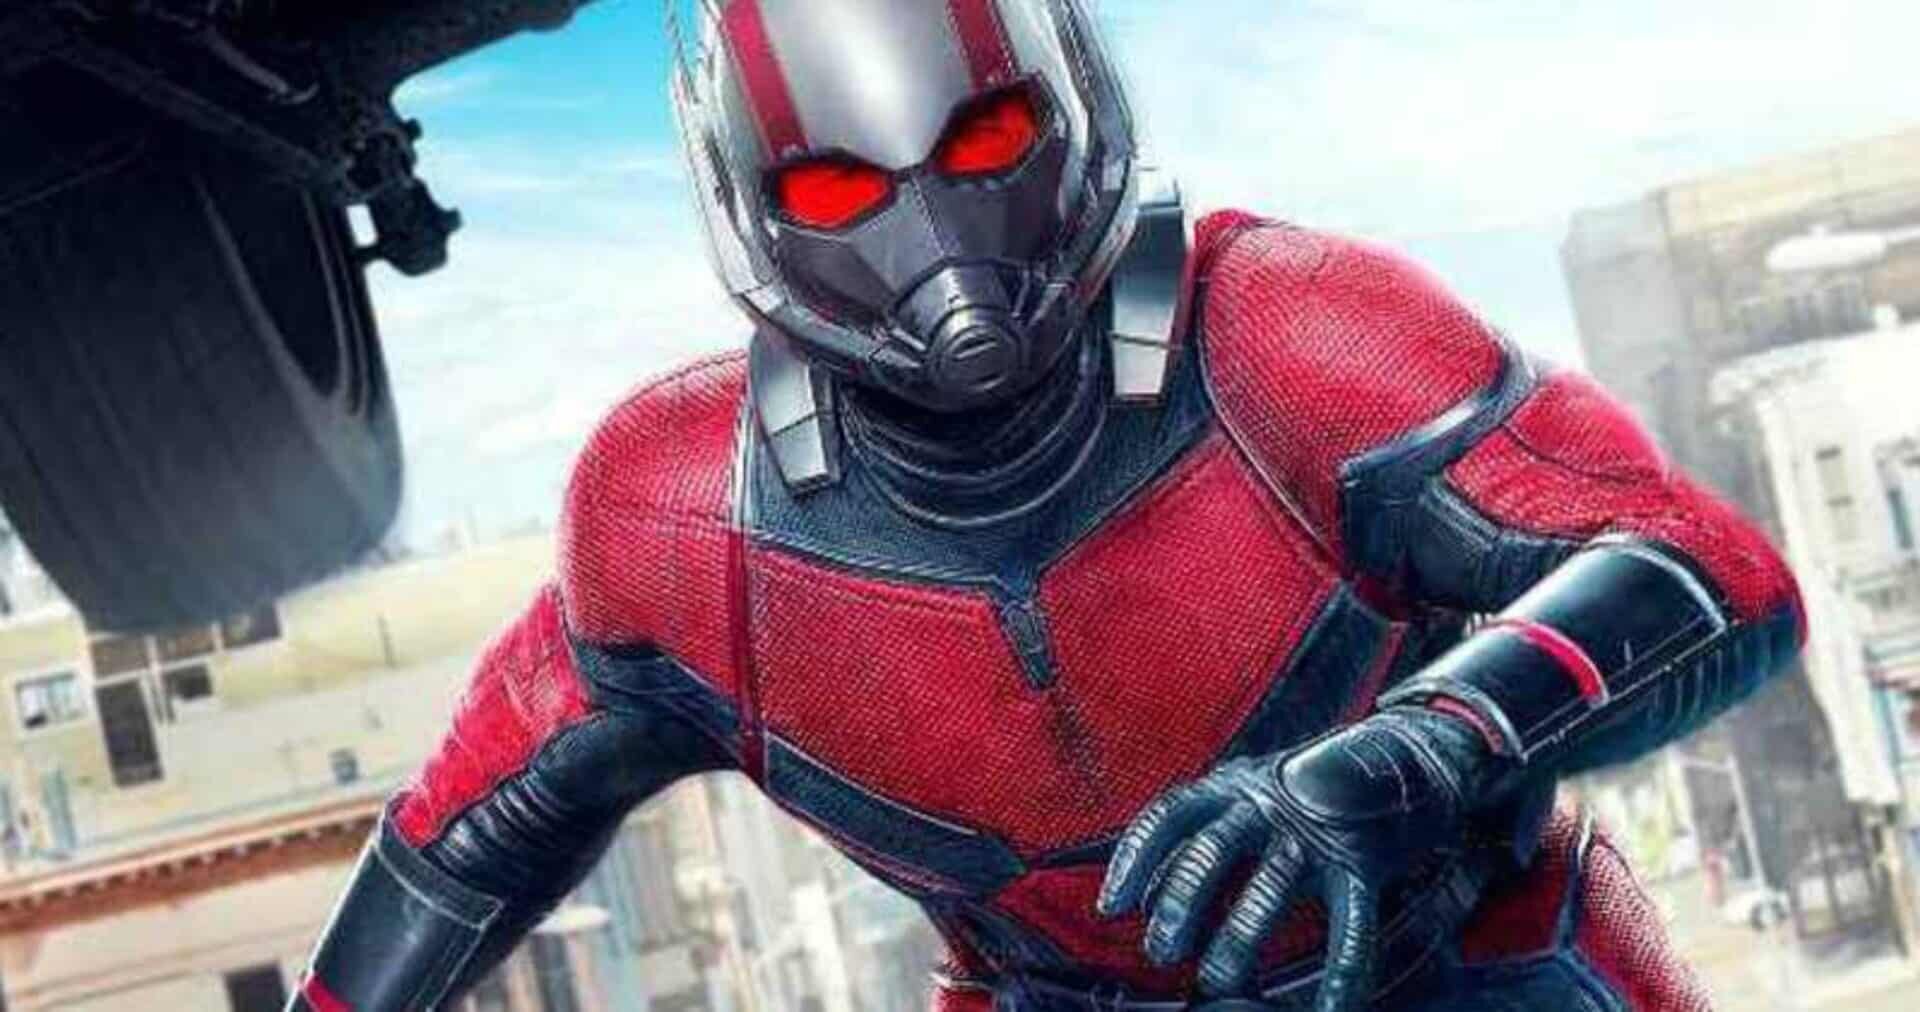 Ant-Man Costume Guide